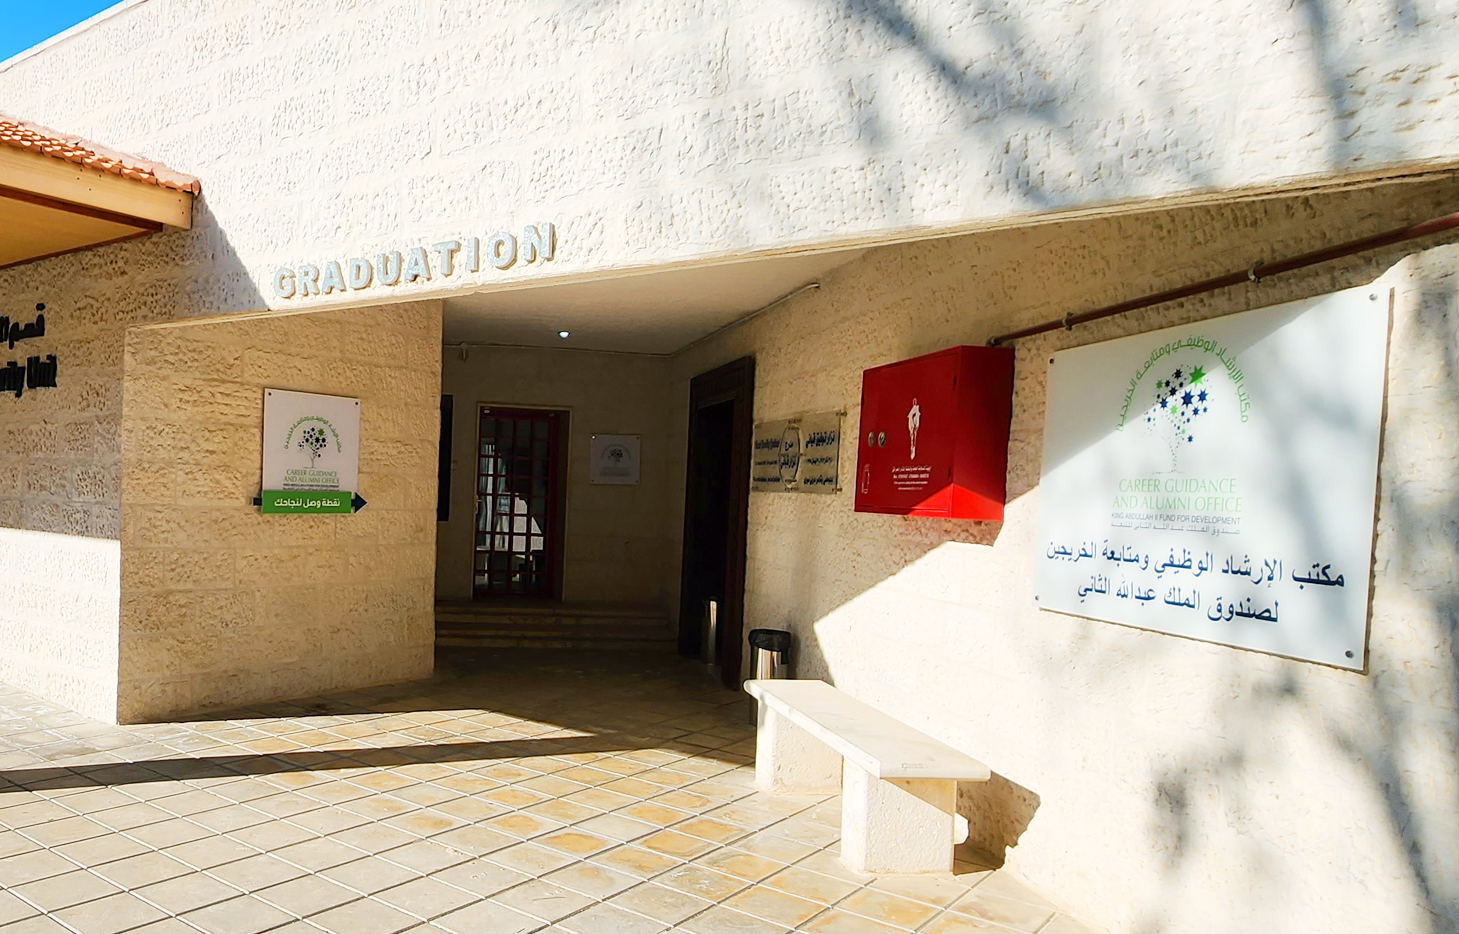 CAREER GUIDE AND ALUMNI OFFICE